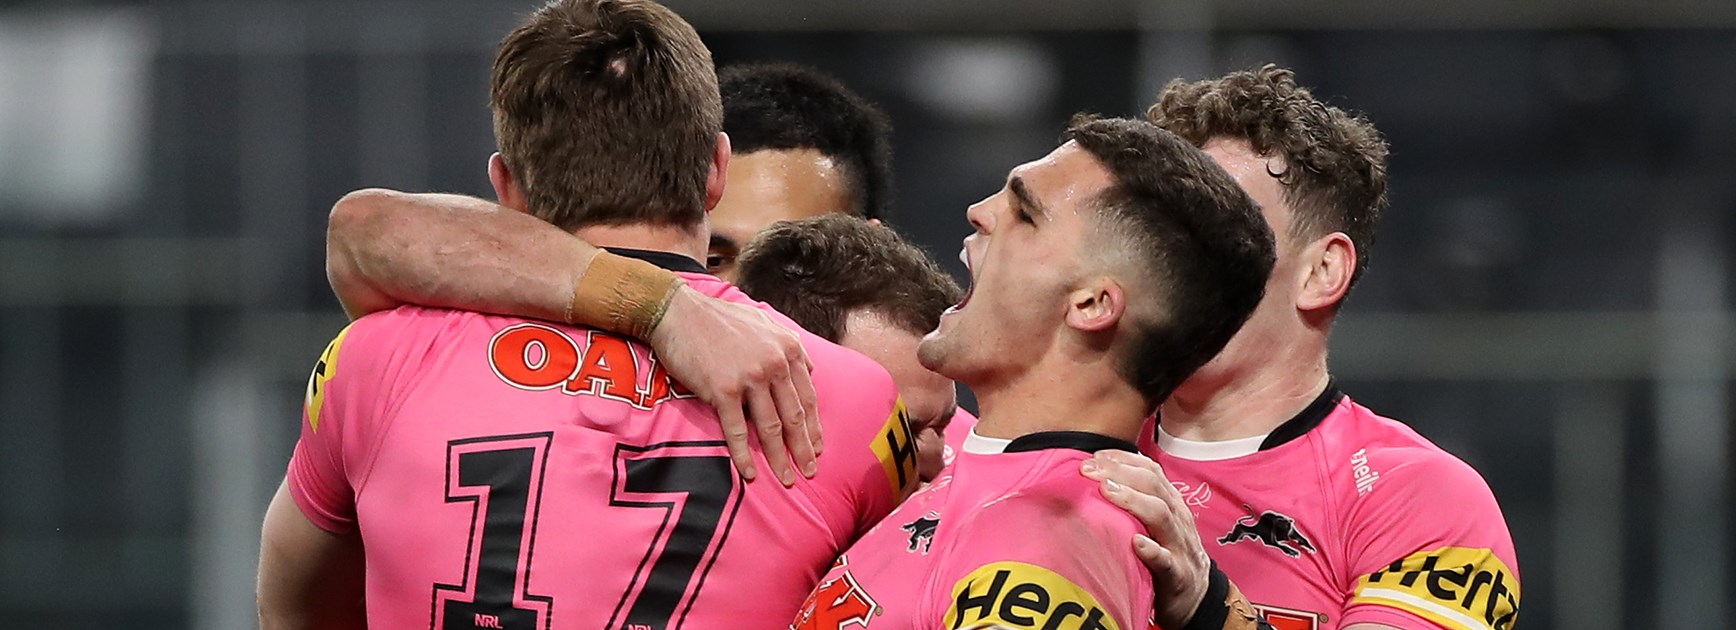 Panthers win fiery encounter over Wests Tigers